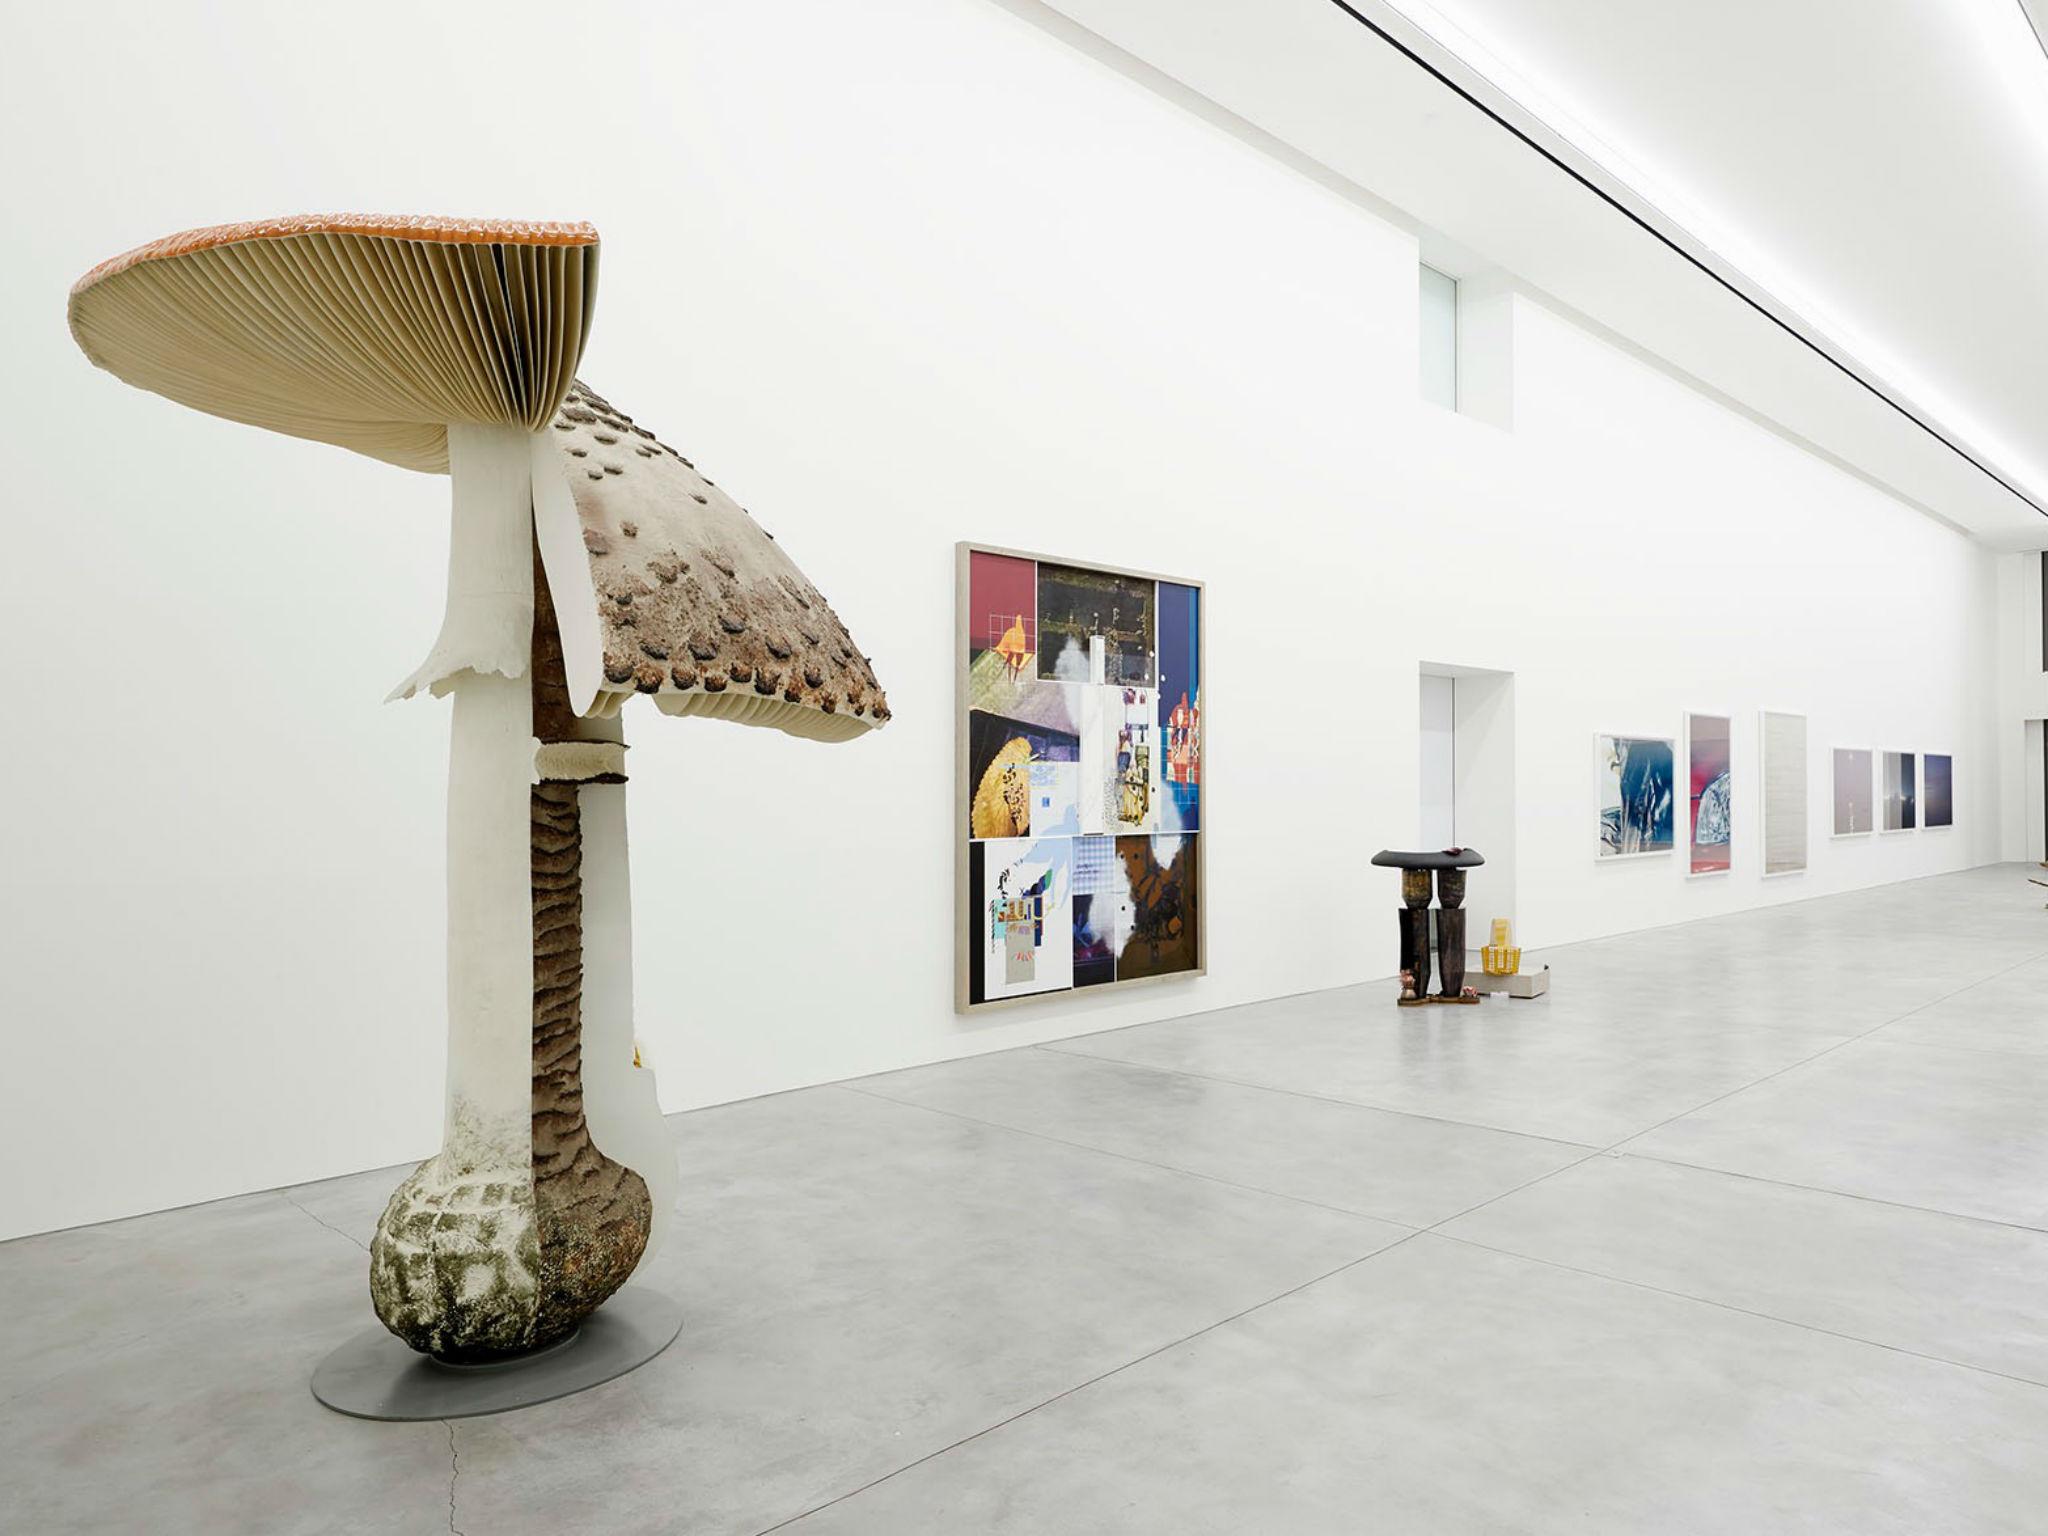 Artists on show at the Aishti Foundation include Carsten Holler whose jaunty mushroom has become like a quasi signature (© Guillaume Ziccarelli)